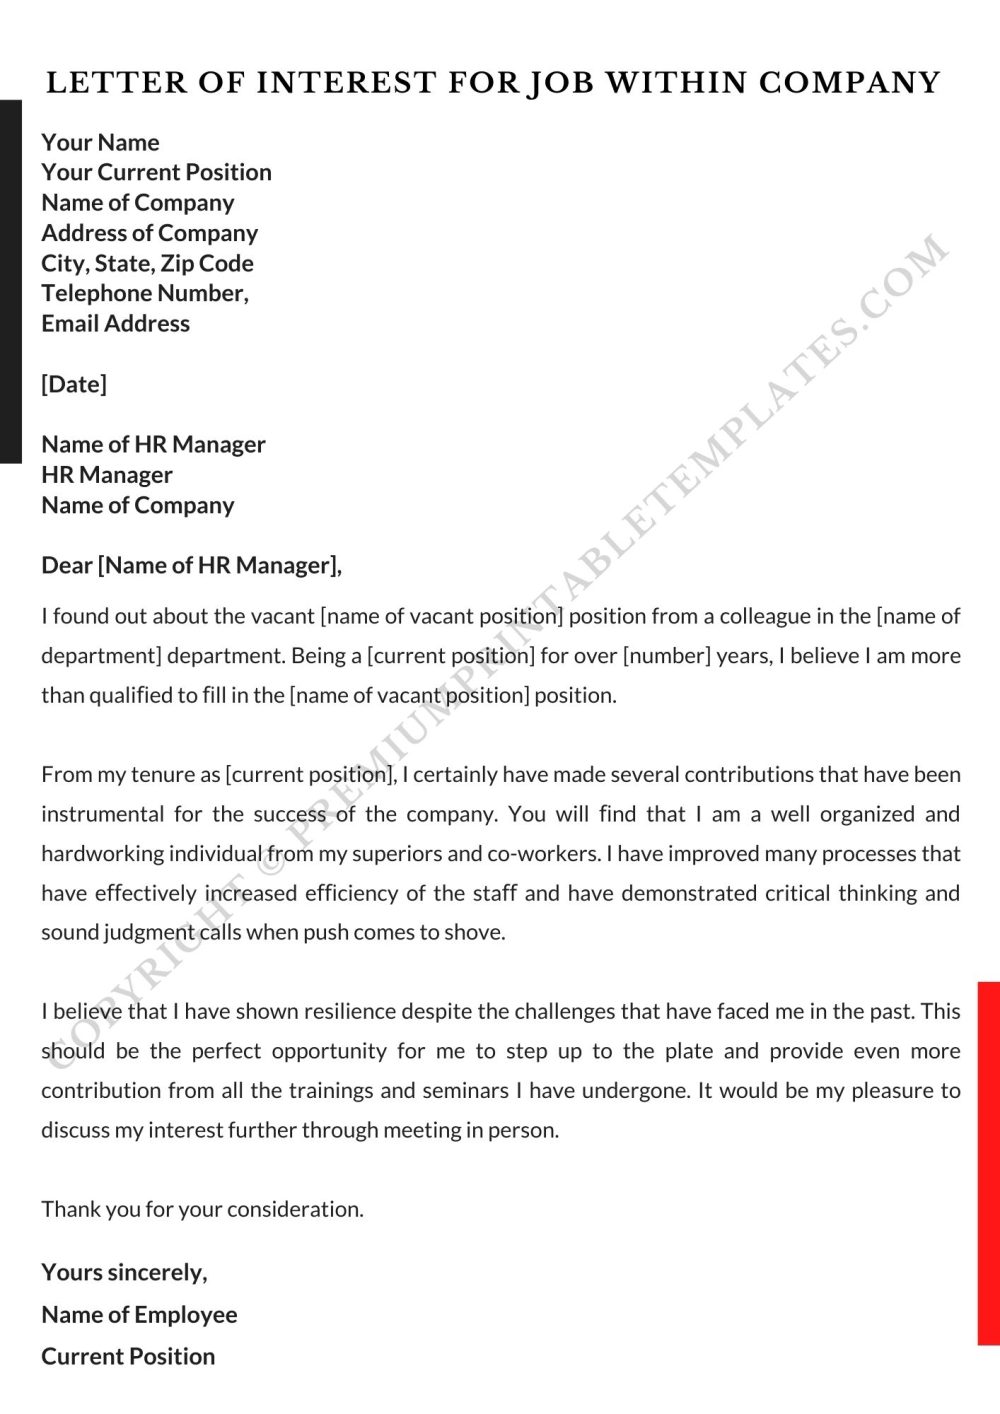 Letter of Interest For Job within company pdf